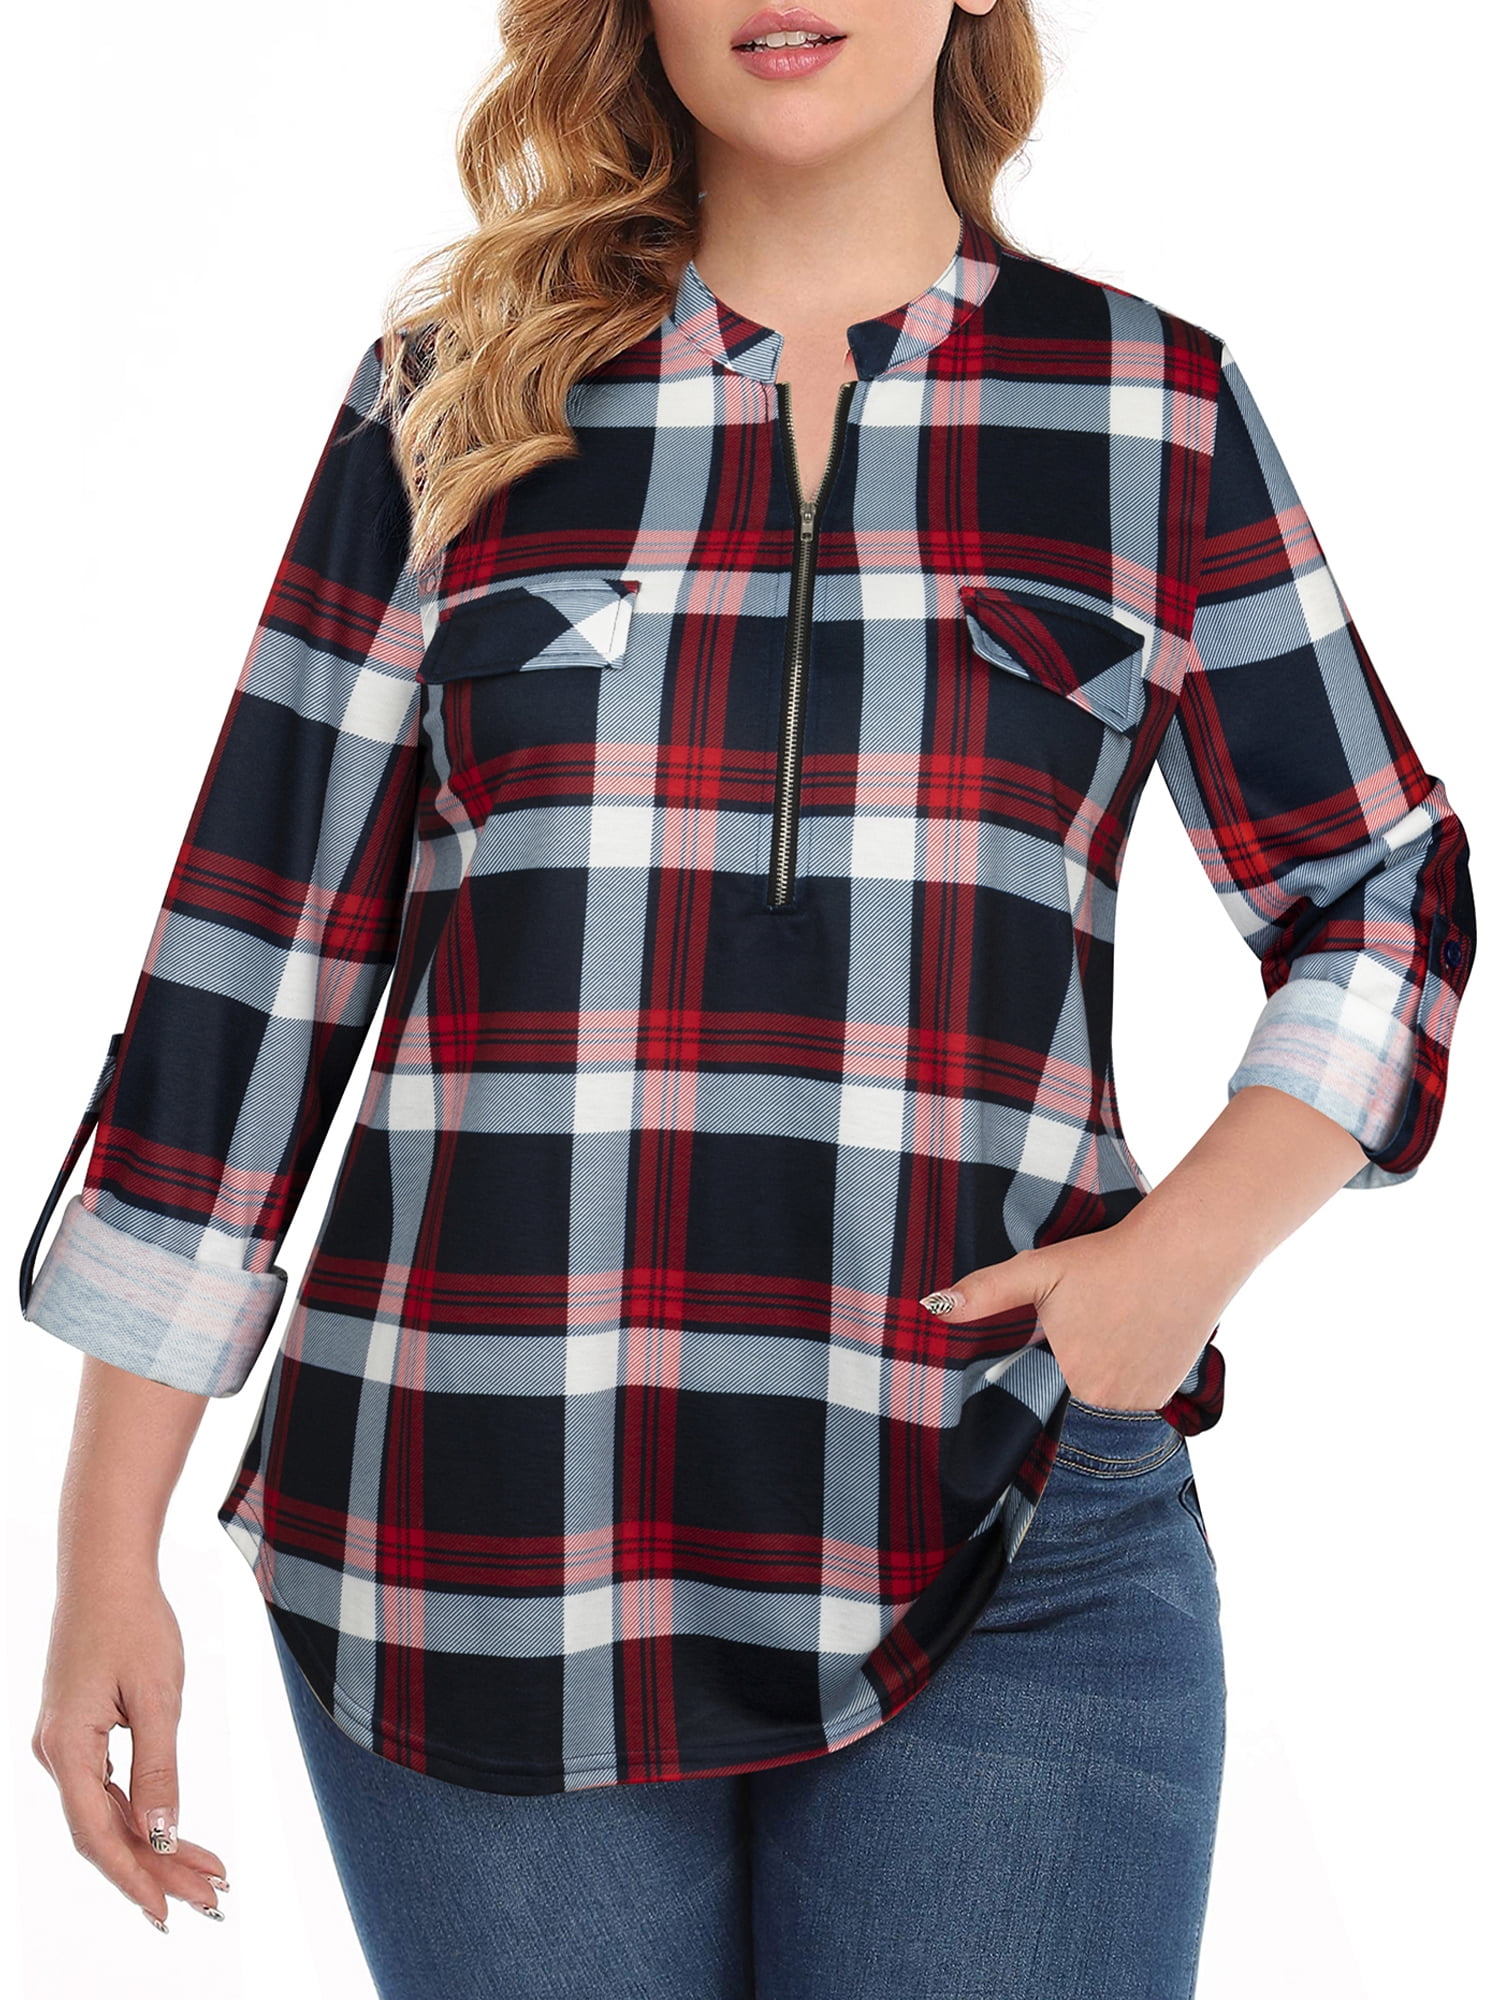 Bulotus Womens Zip Front V-Neck Short Sleeve Work Casual Top Blouse Shirt Solid and Plaid 